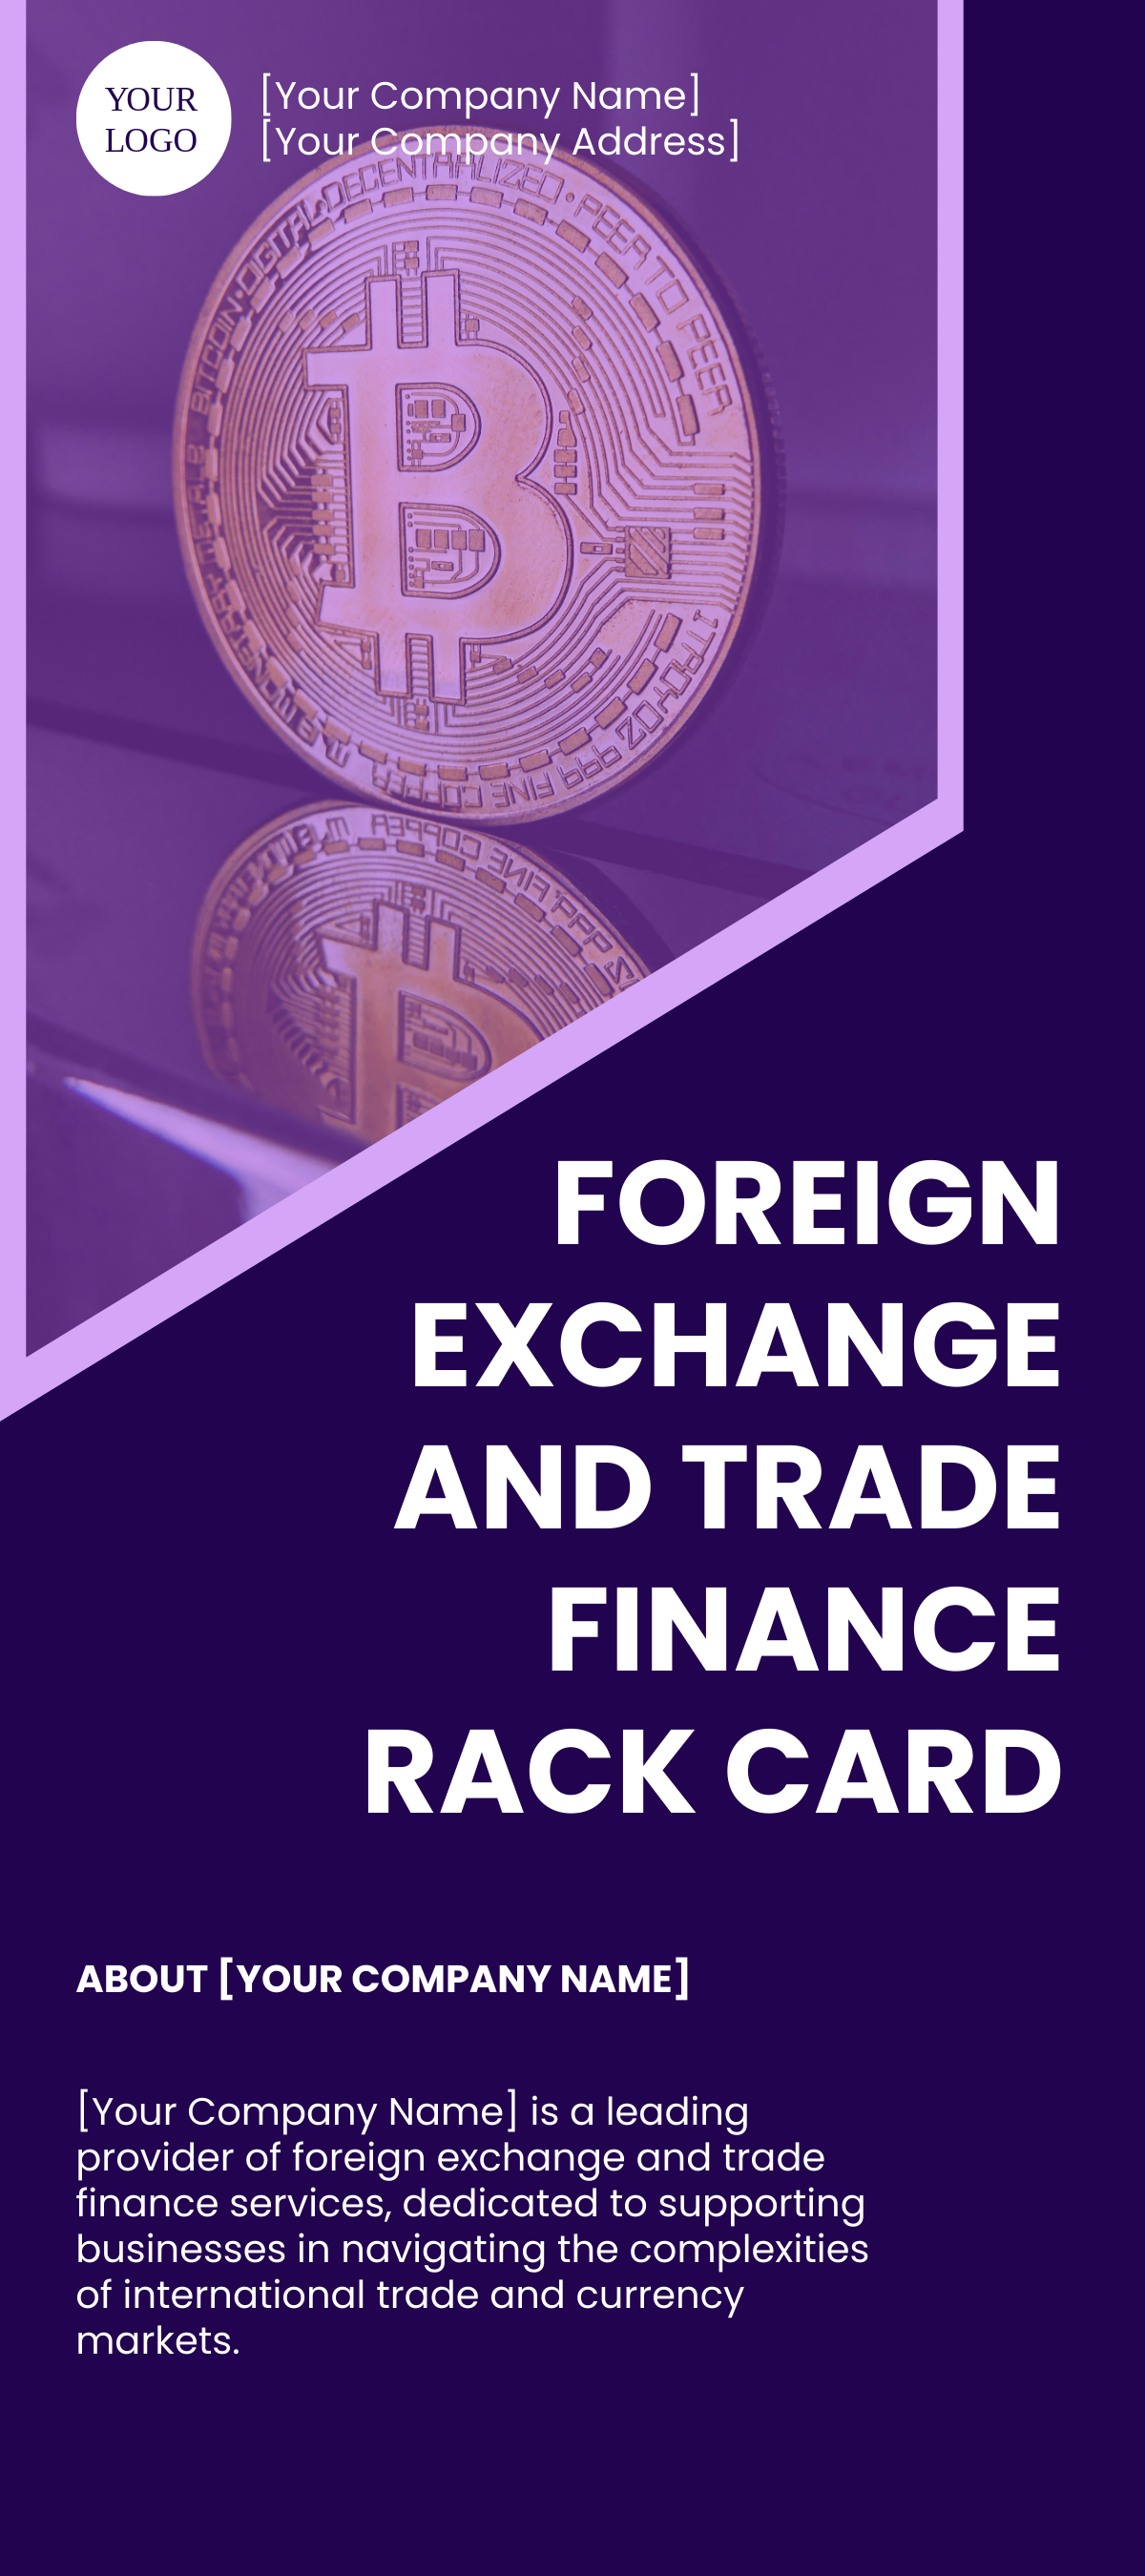 Foreign Exchange and Trade Finance Rack Card Template